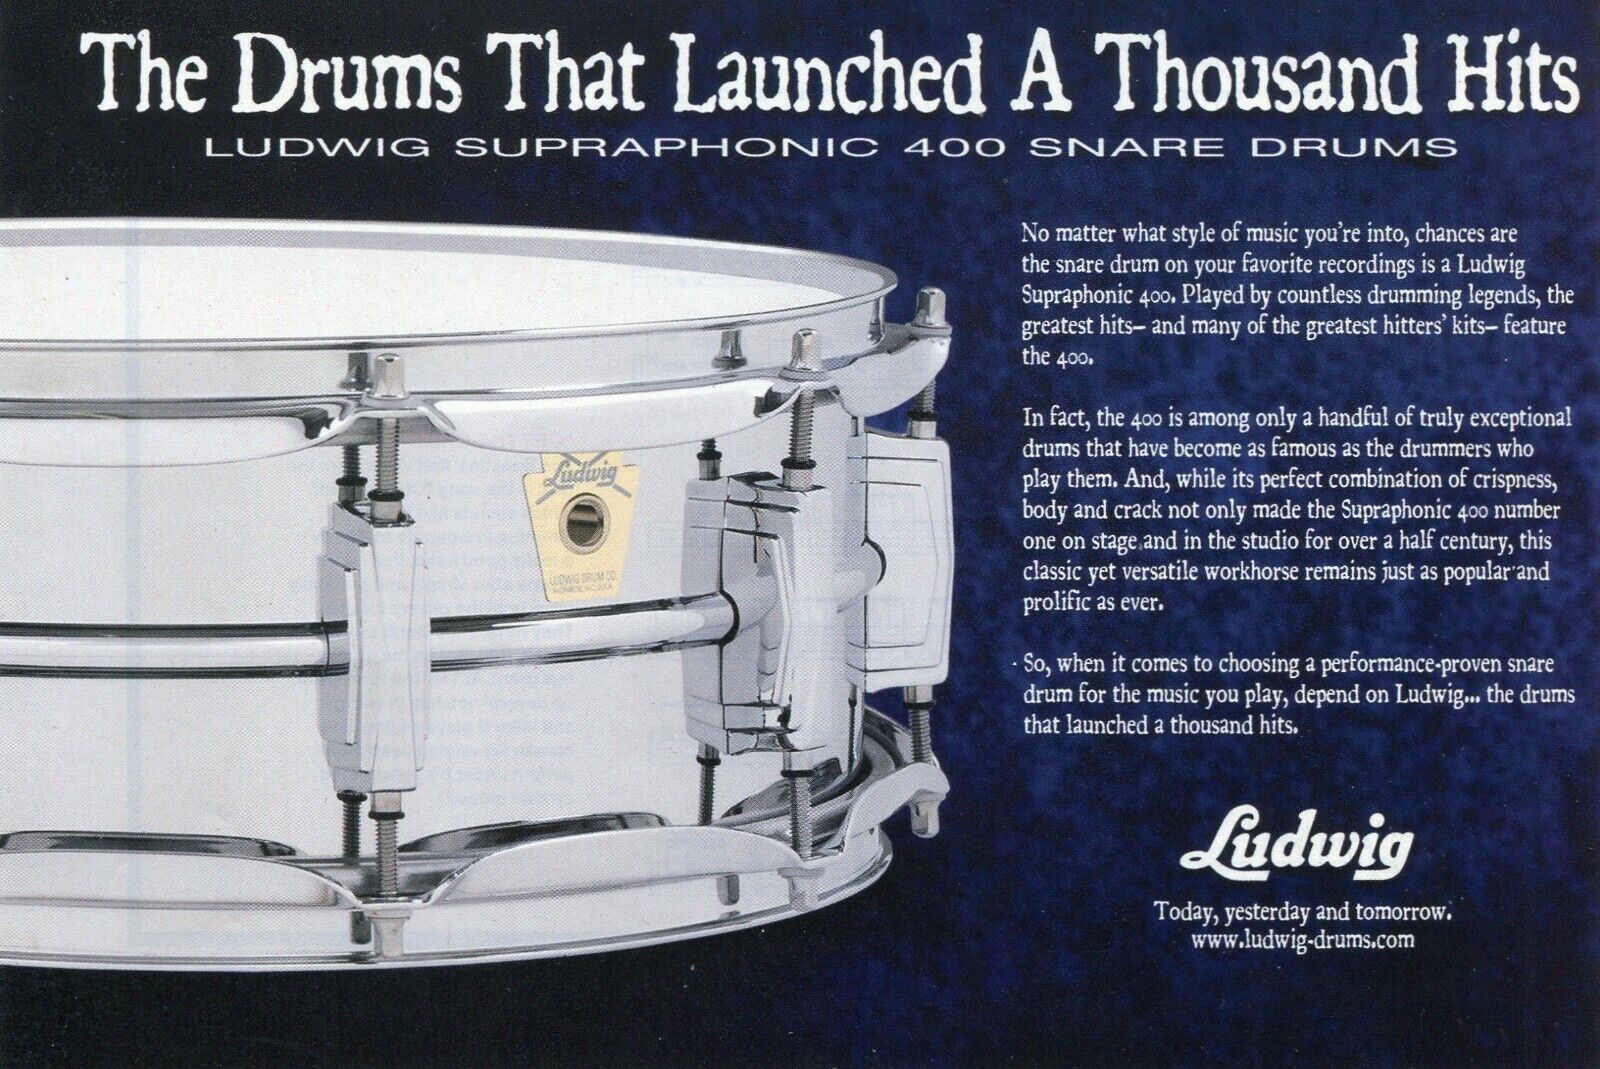 2007 small Print Ad of Ludwig Supraphonic 400 Snare Drum